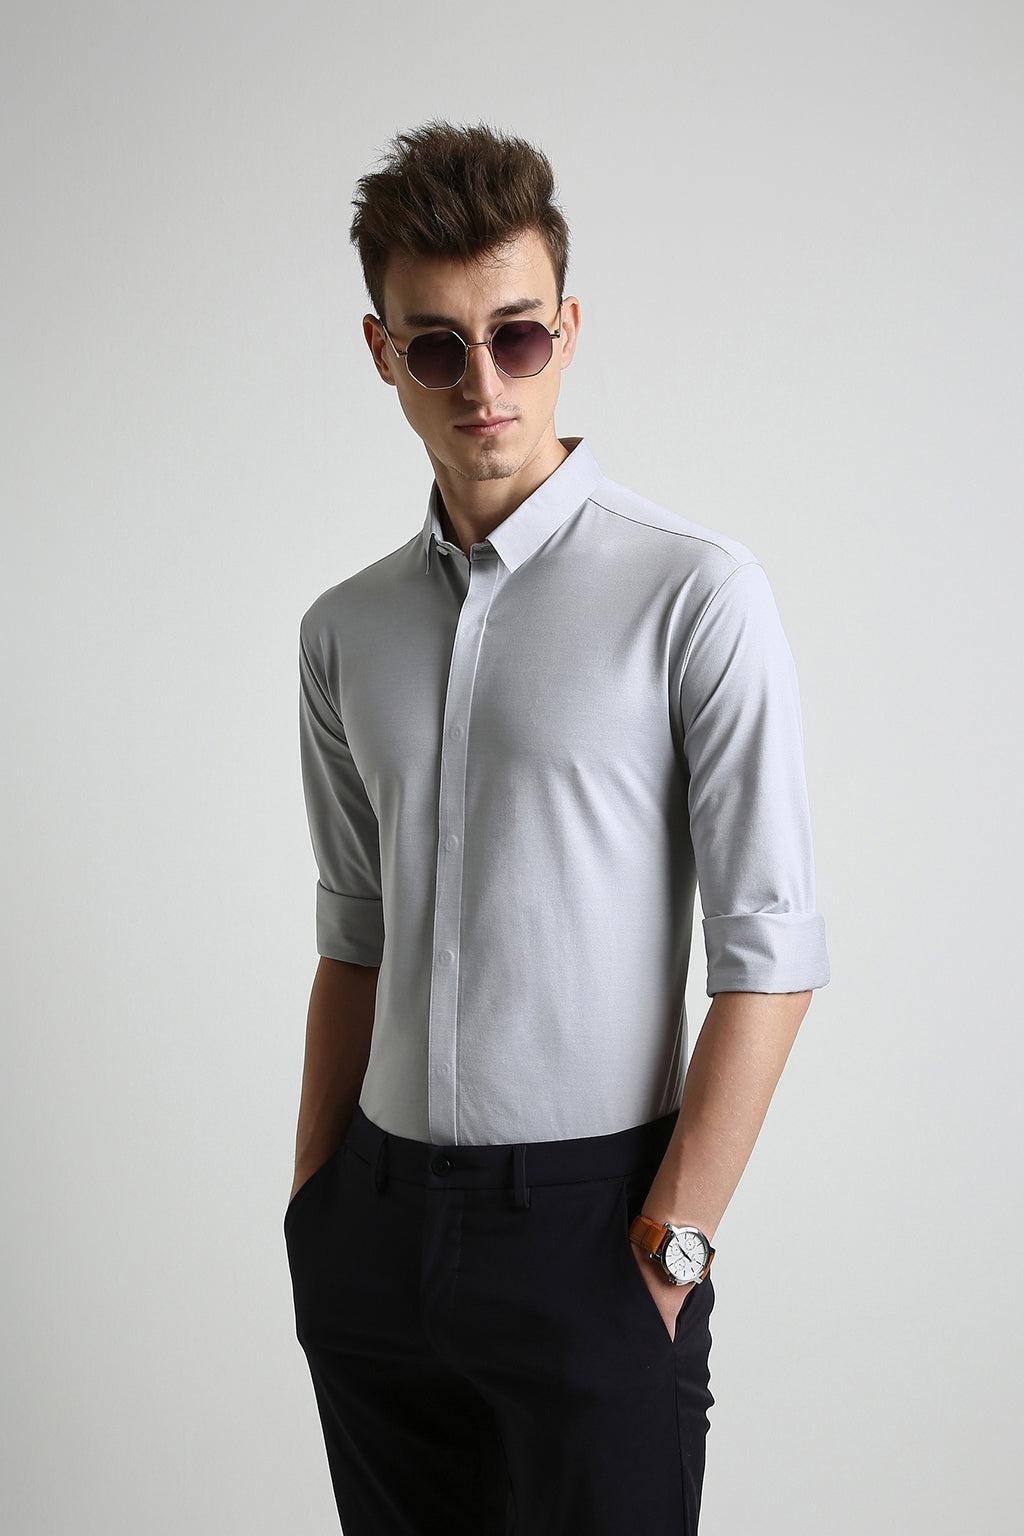 KNITTED GREY SHIRT